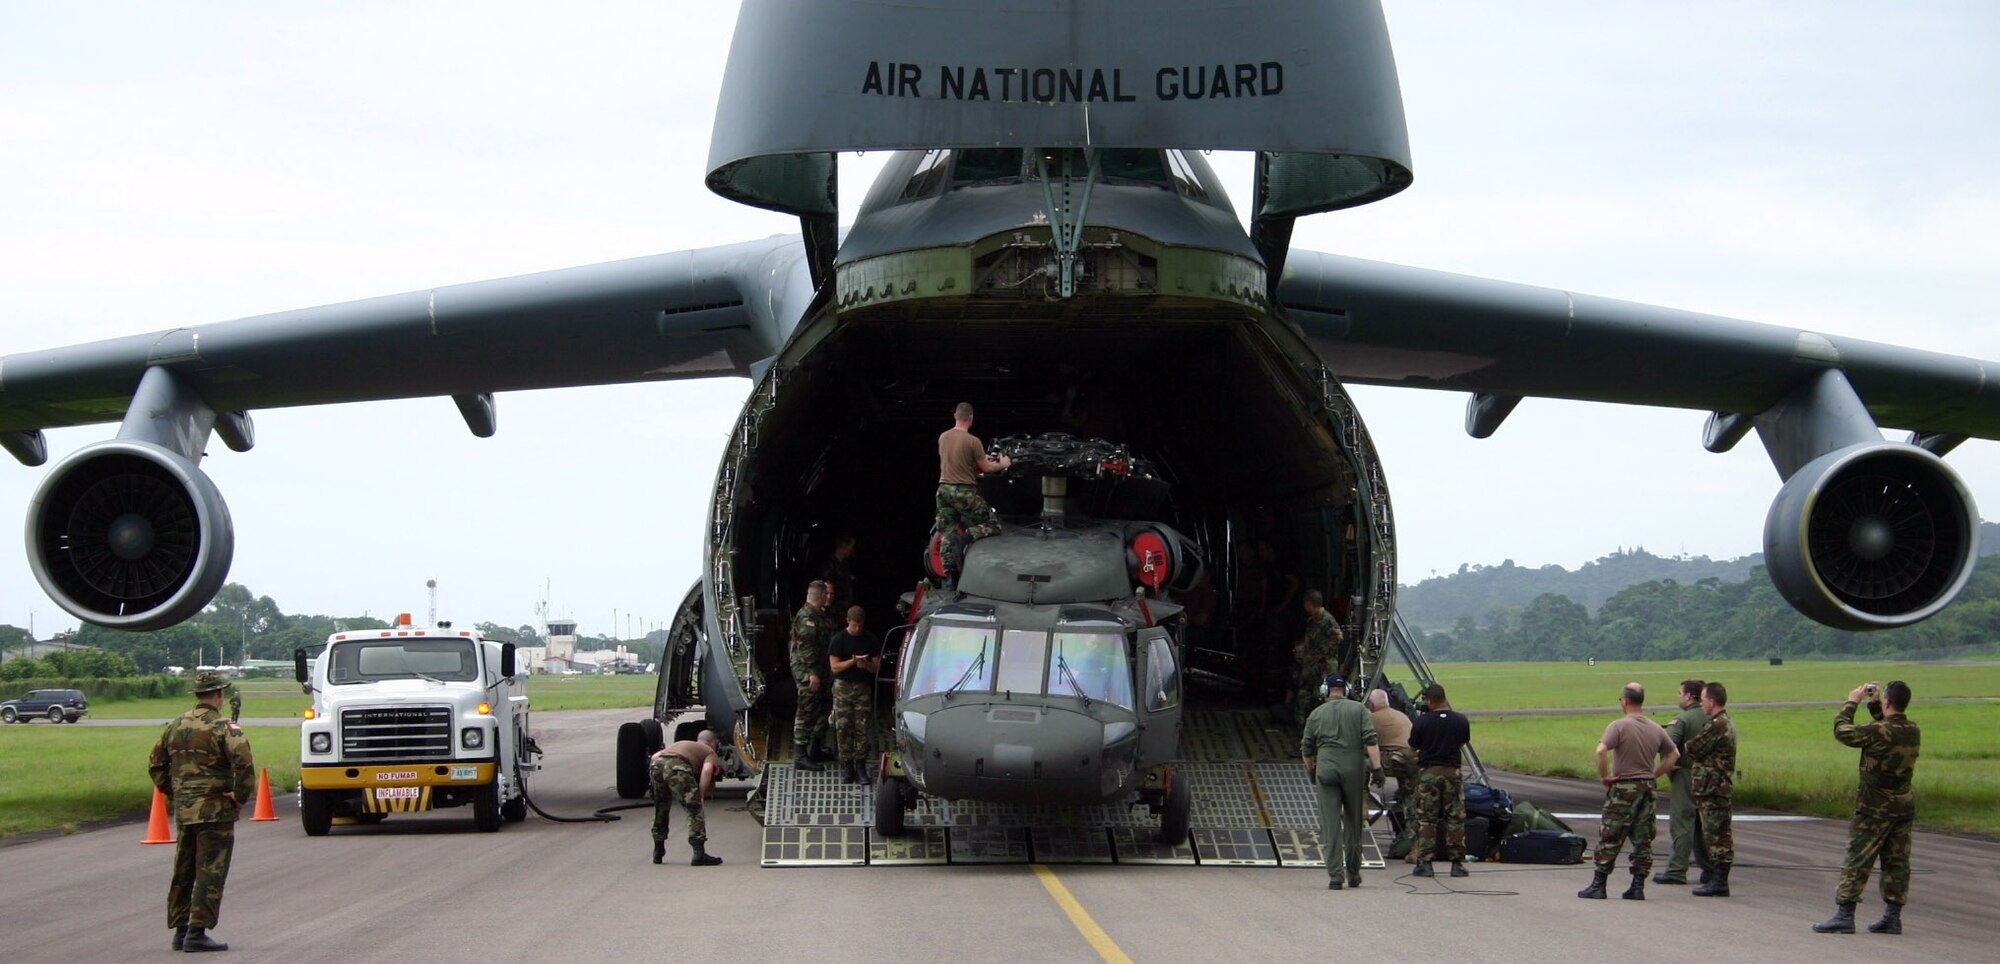 LA CEIBA, Honduras (AFPN) -- Crew members move a UH-60 Black Hawk off of a C-5 Galaxy in La Ceiba, Honduras. The C-5, from the 105th Airlift Wing, New York Air National Guard, delivered three Black Hawks and a Humvee for the "New Horizons 2006 -- Honduras" joint training exercise. The Black Hawks, deployed here from the New York Army National Guard's 3-142 Aviation Battalion, will provide transport and emergency evacuation support for New Horizons. (U.S. Air Force photo by Capt. Mike Chillstrom)